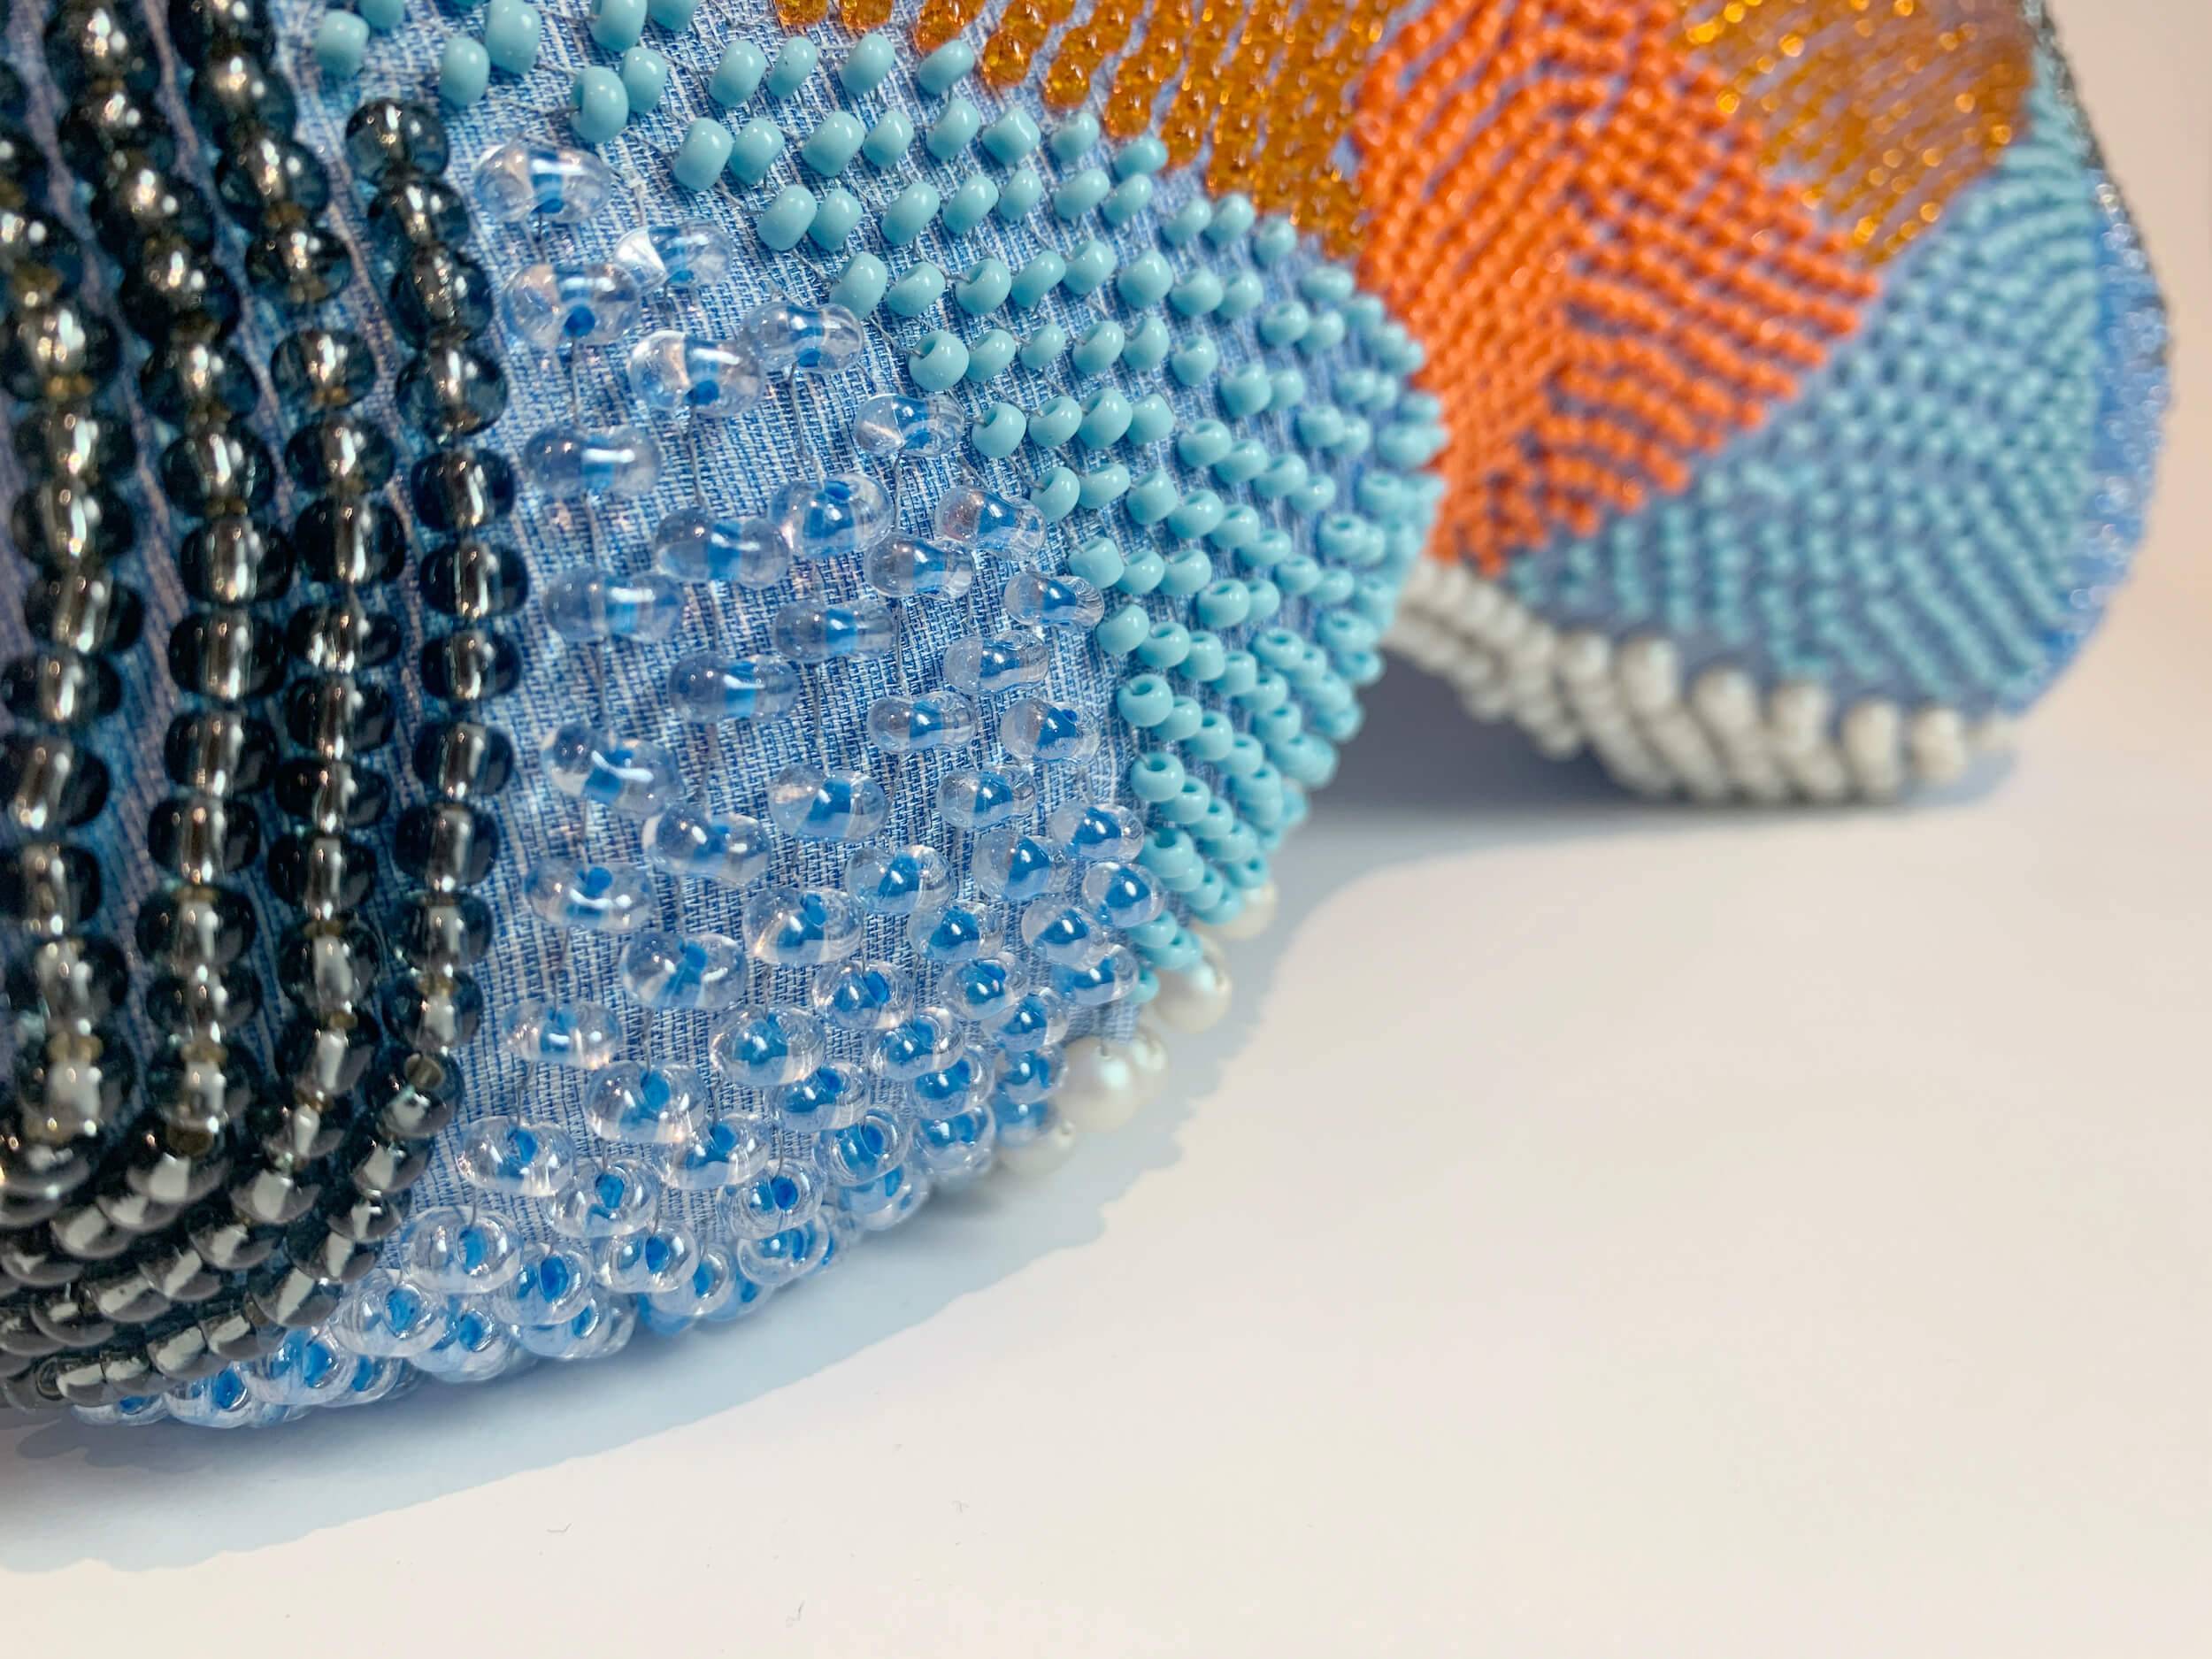 Beading in shades of blue, black, coral and white on a head pillow